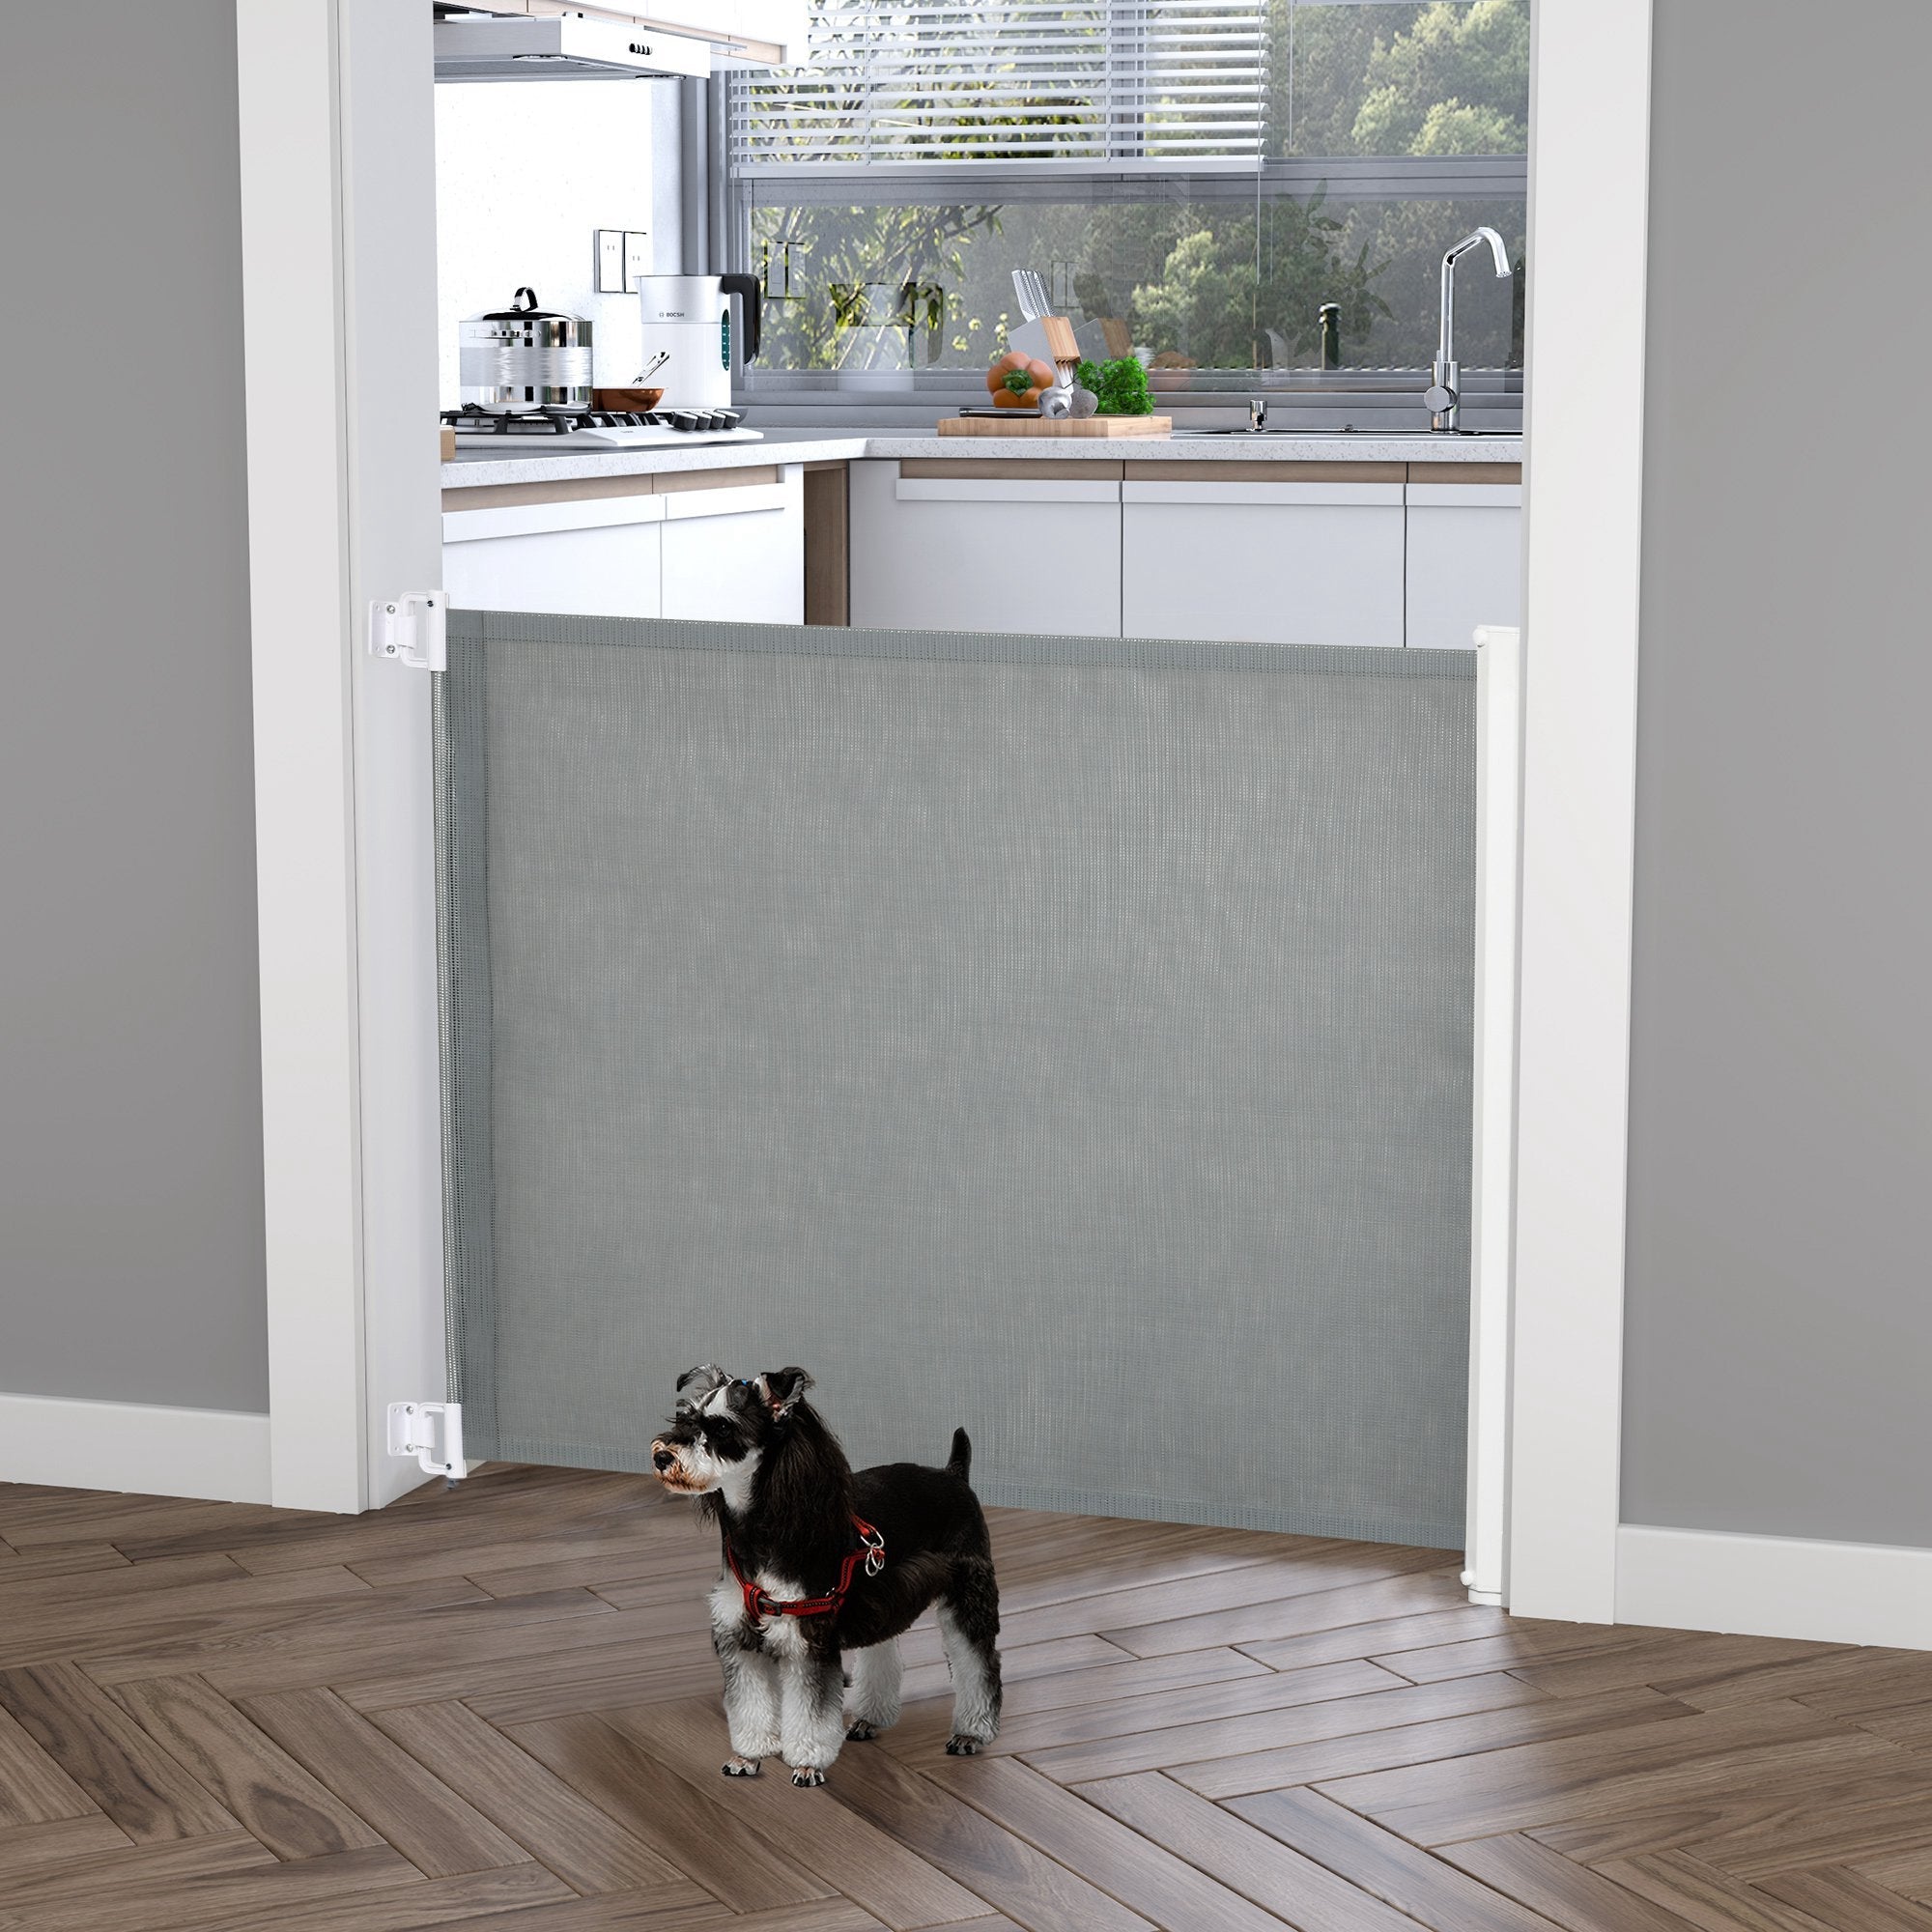 Retractable Safety Gate Dog Pet Guard Barrier Folding Protector Home Doorway Room Divider Stair Guard Grey 115L x 82.5H cm-1